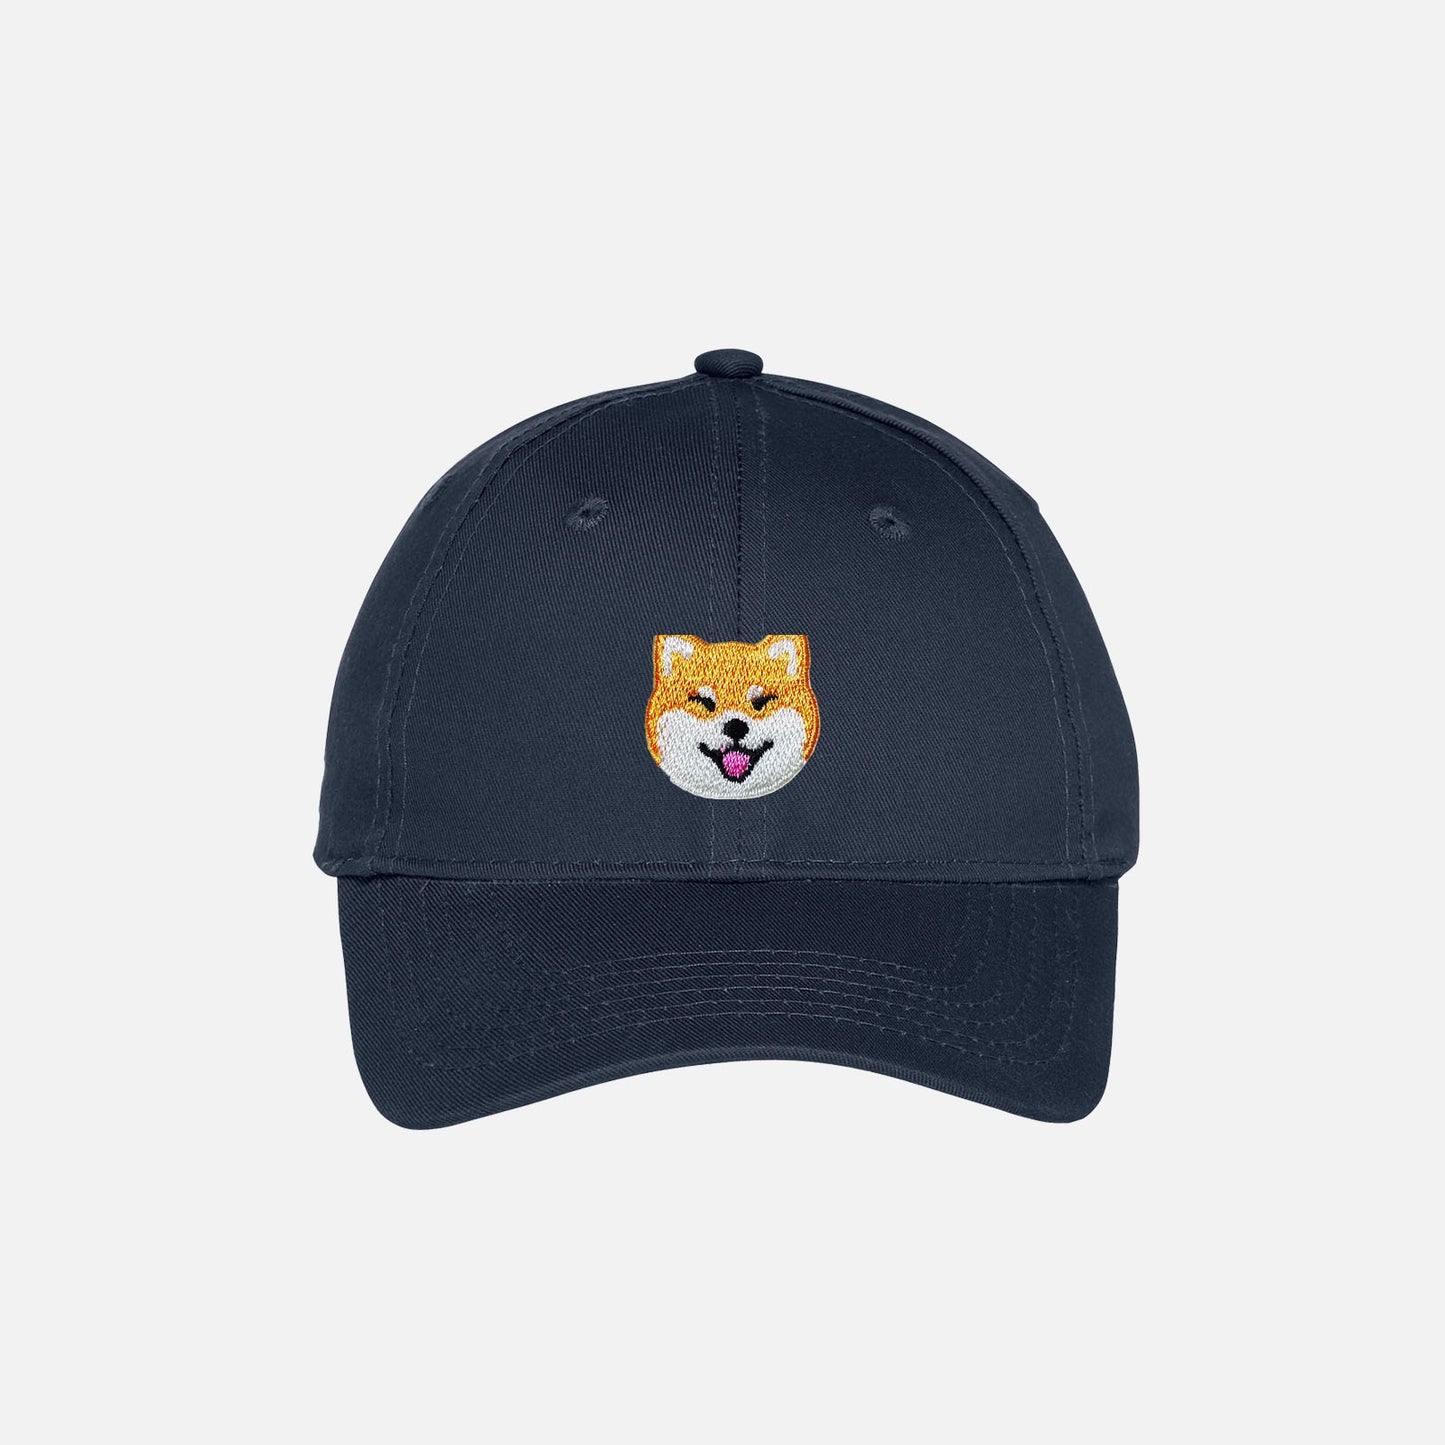 Navy Blue Custom Dog Kids Hat personalized and embroidered on the front.